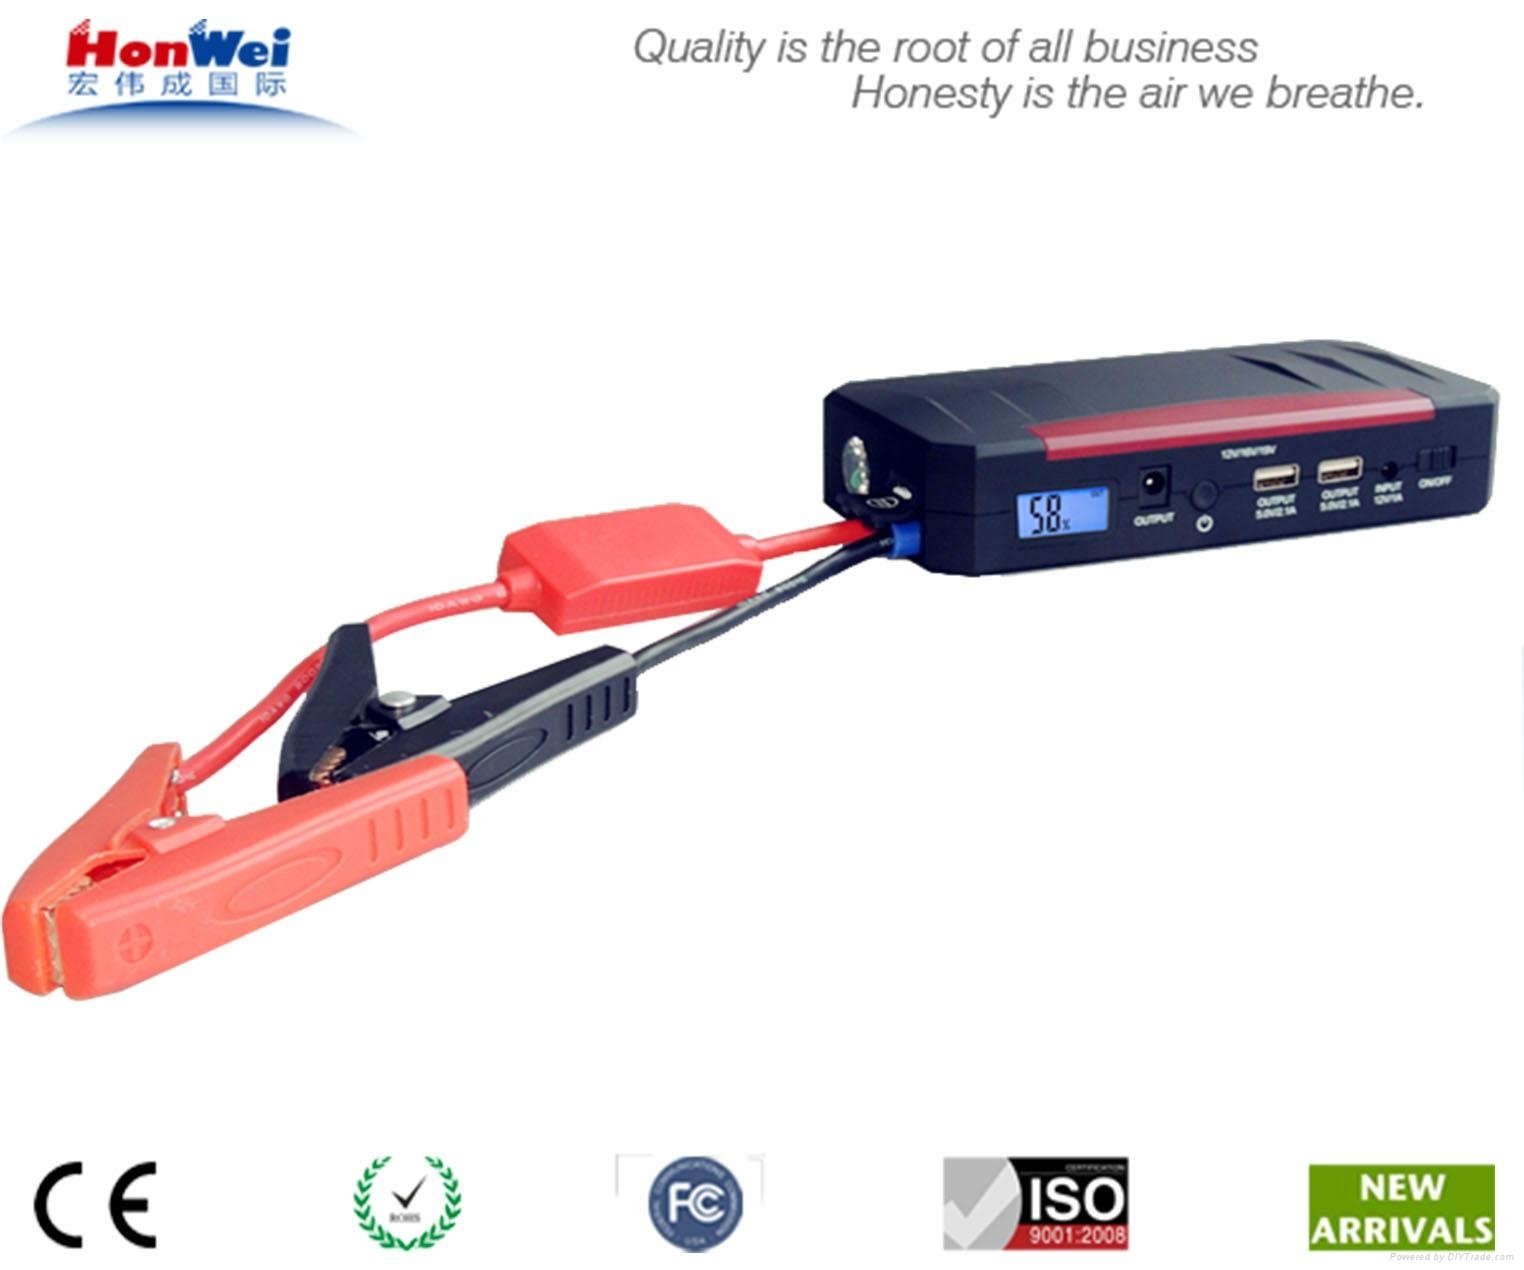 Multifunction car battery booster with tablet charging function 5